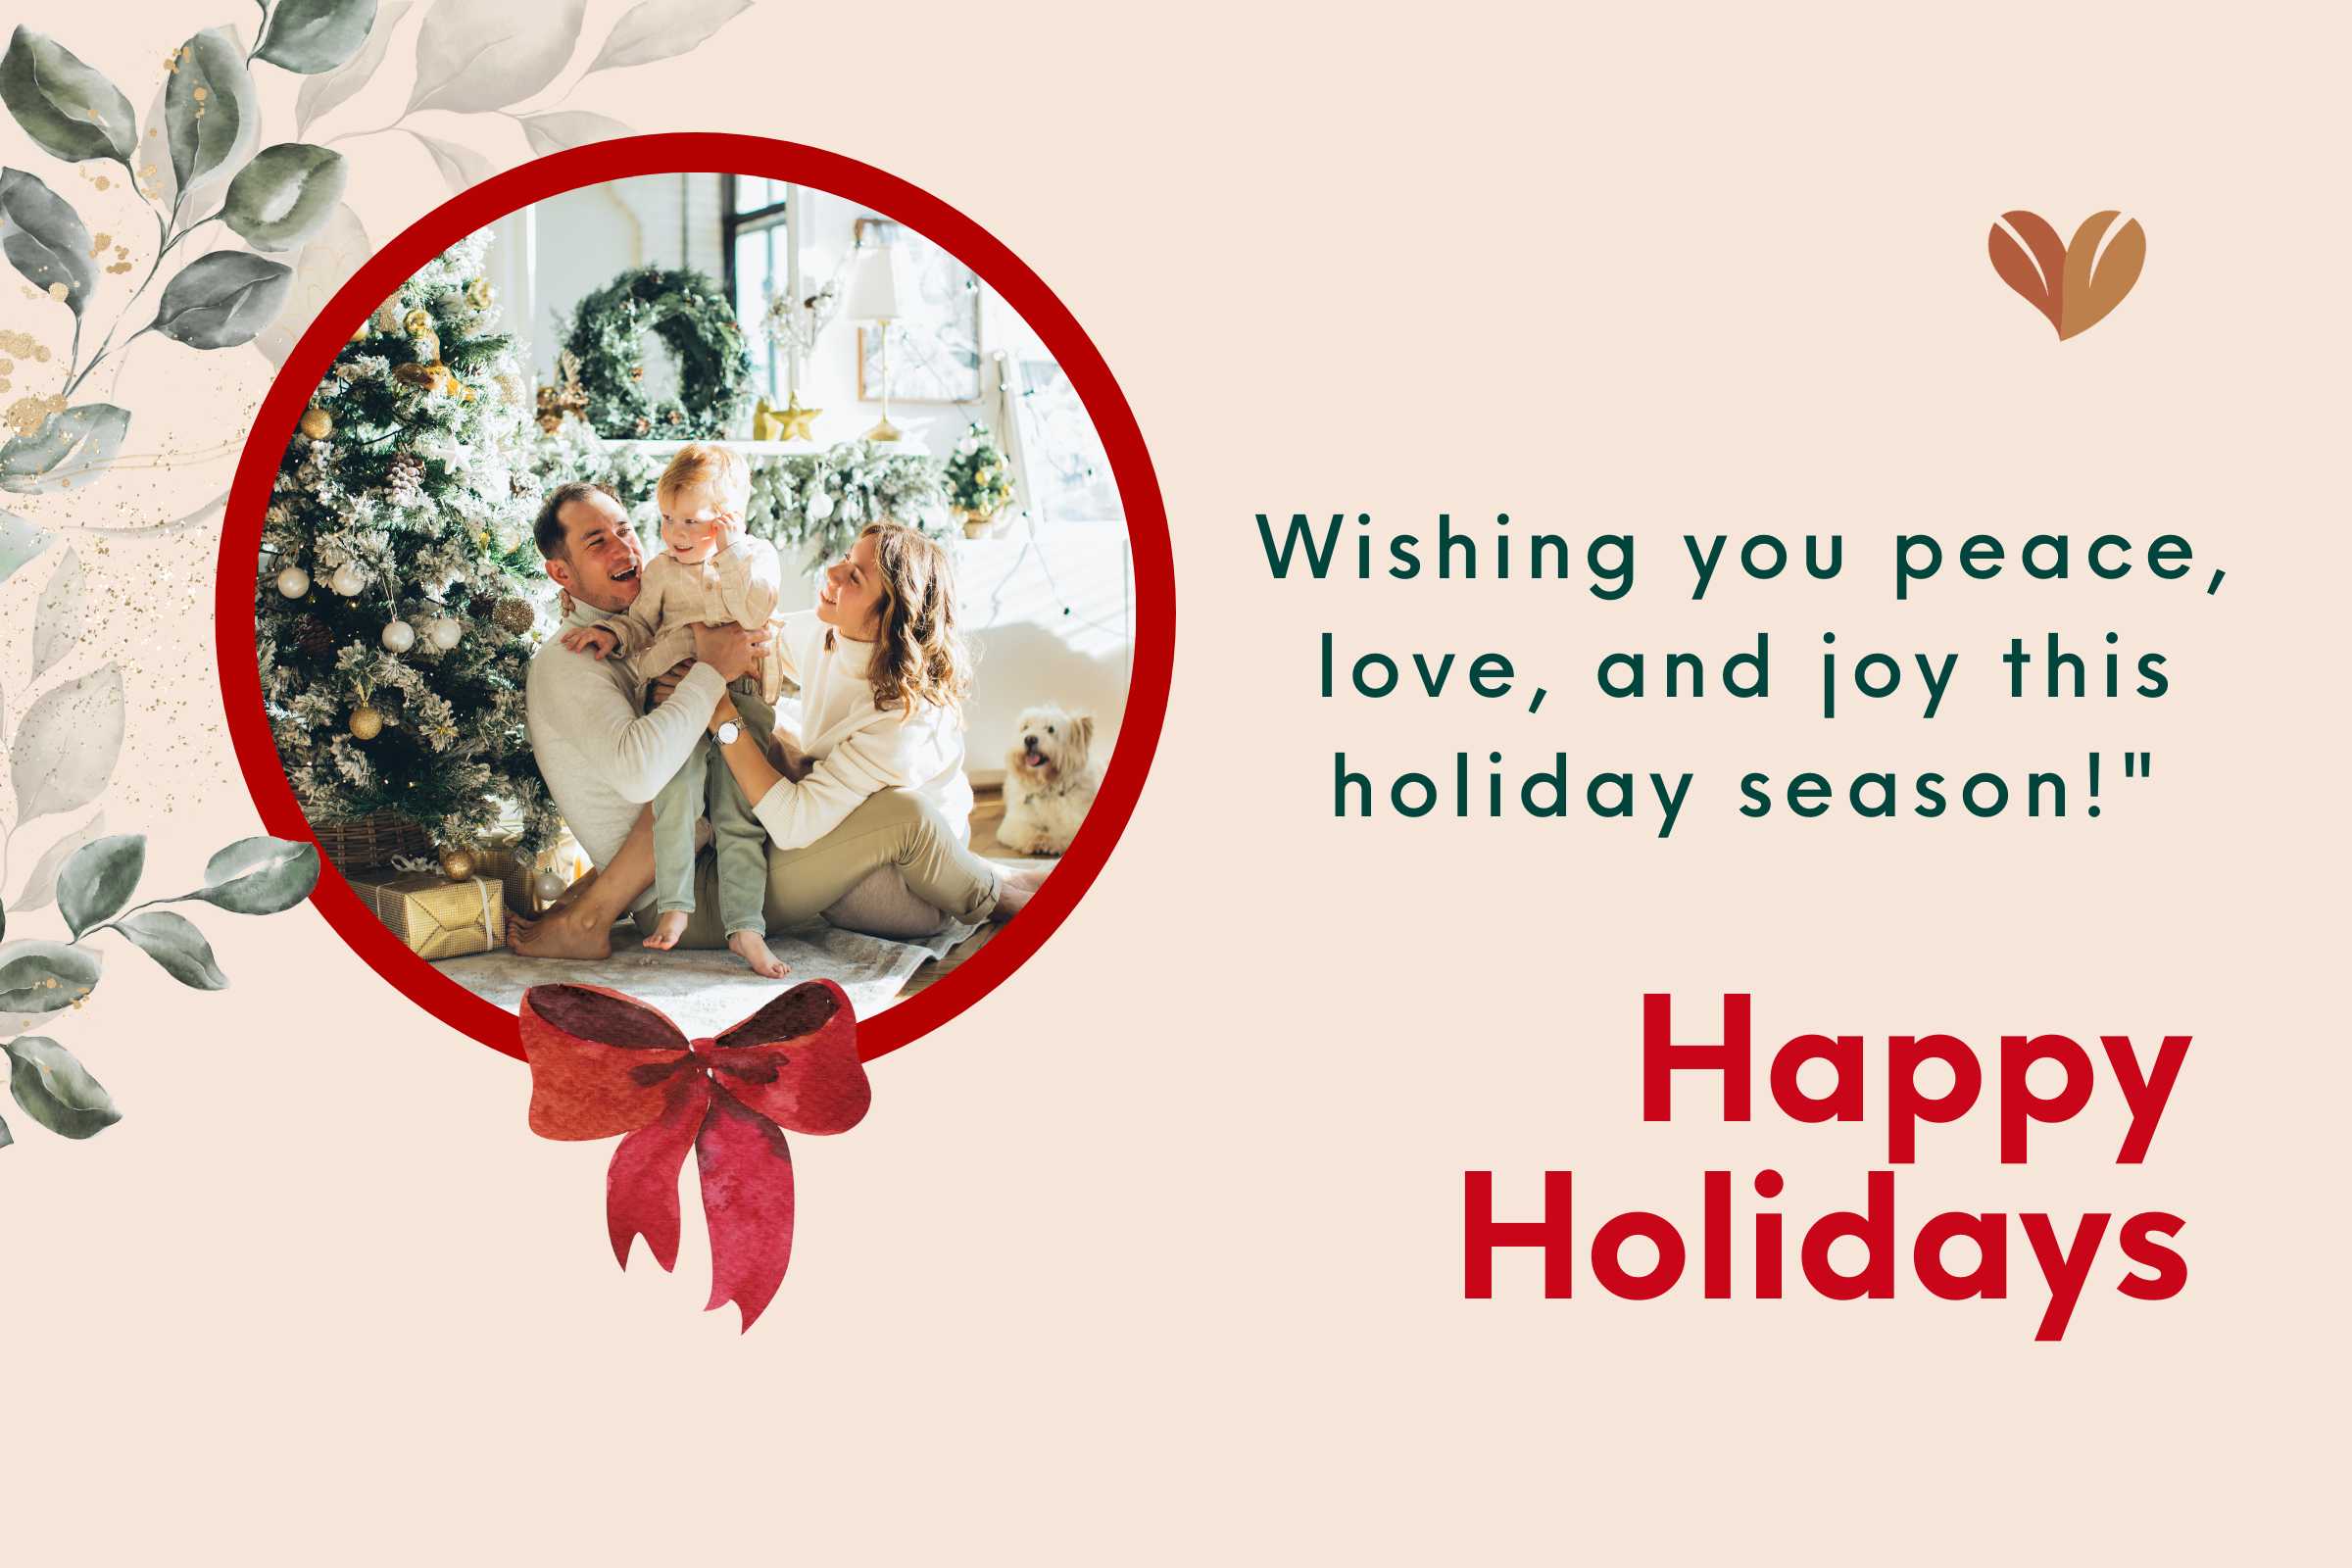 Wishing you a season of blessings and joy